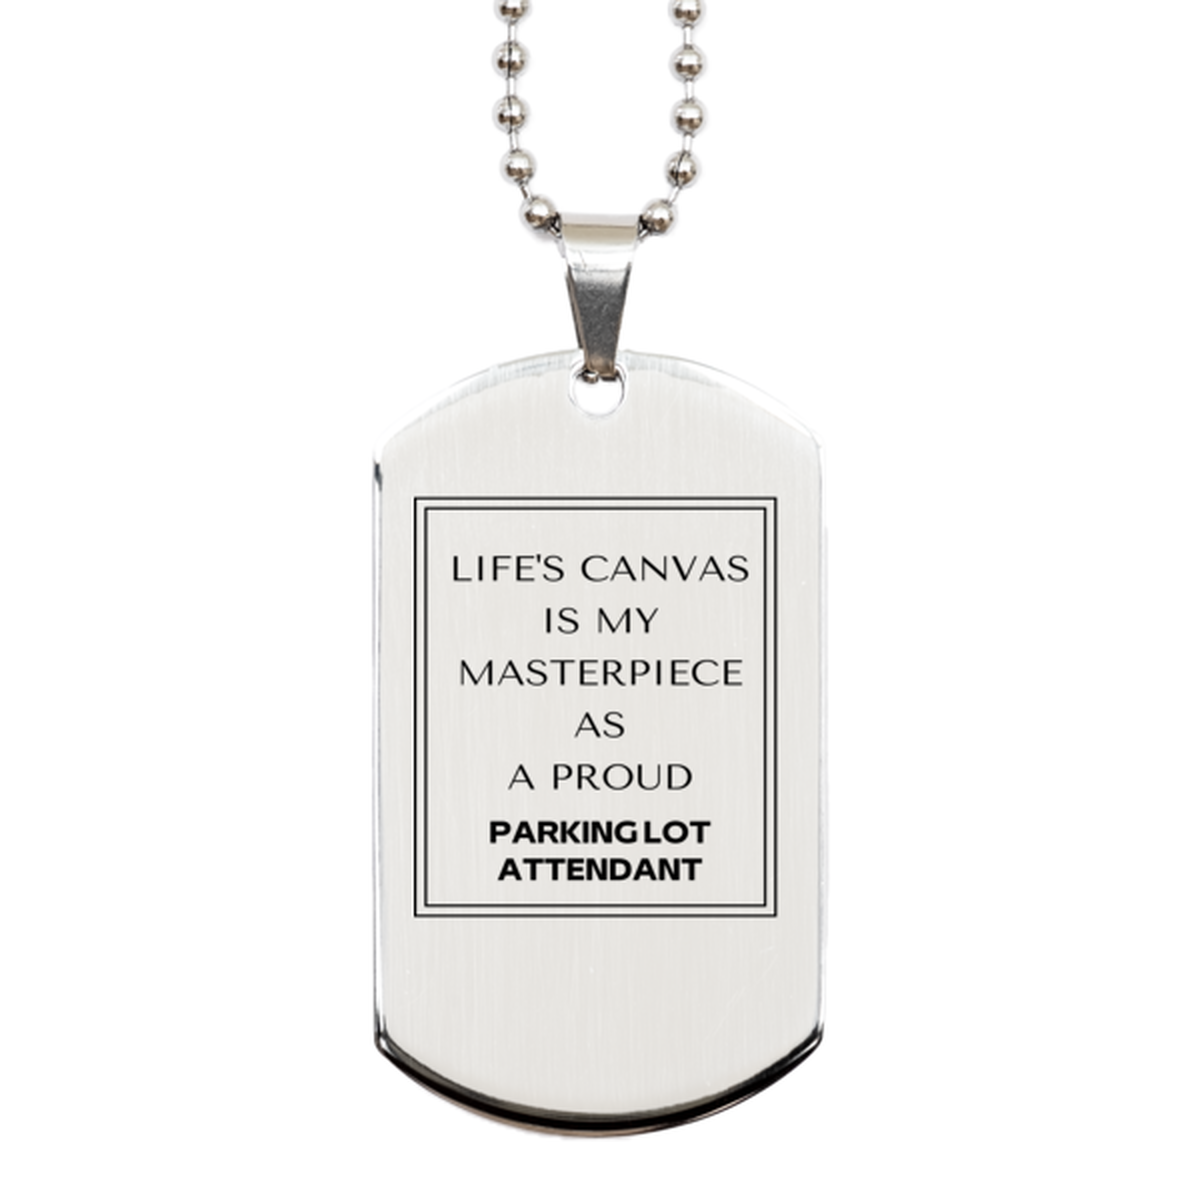 Proud Parking Lot Attendant Gifts, Life's canvas is my masterpiece, Epic Birthday Christmas Unique Silver Dog Tag For Parking Lot Attendant, Coworkers, Men, Women, Friends